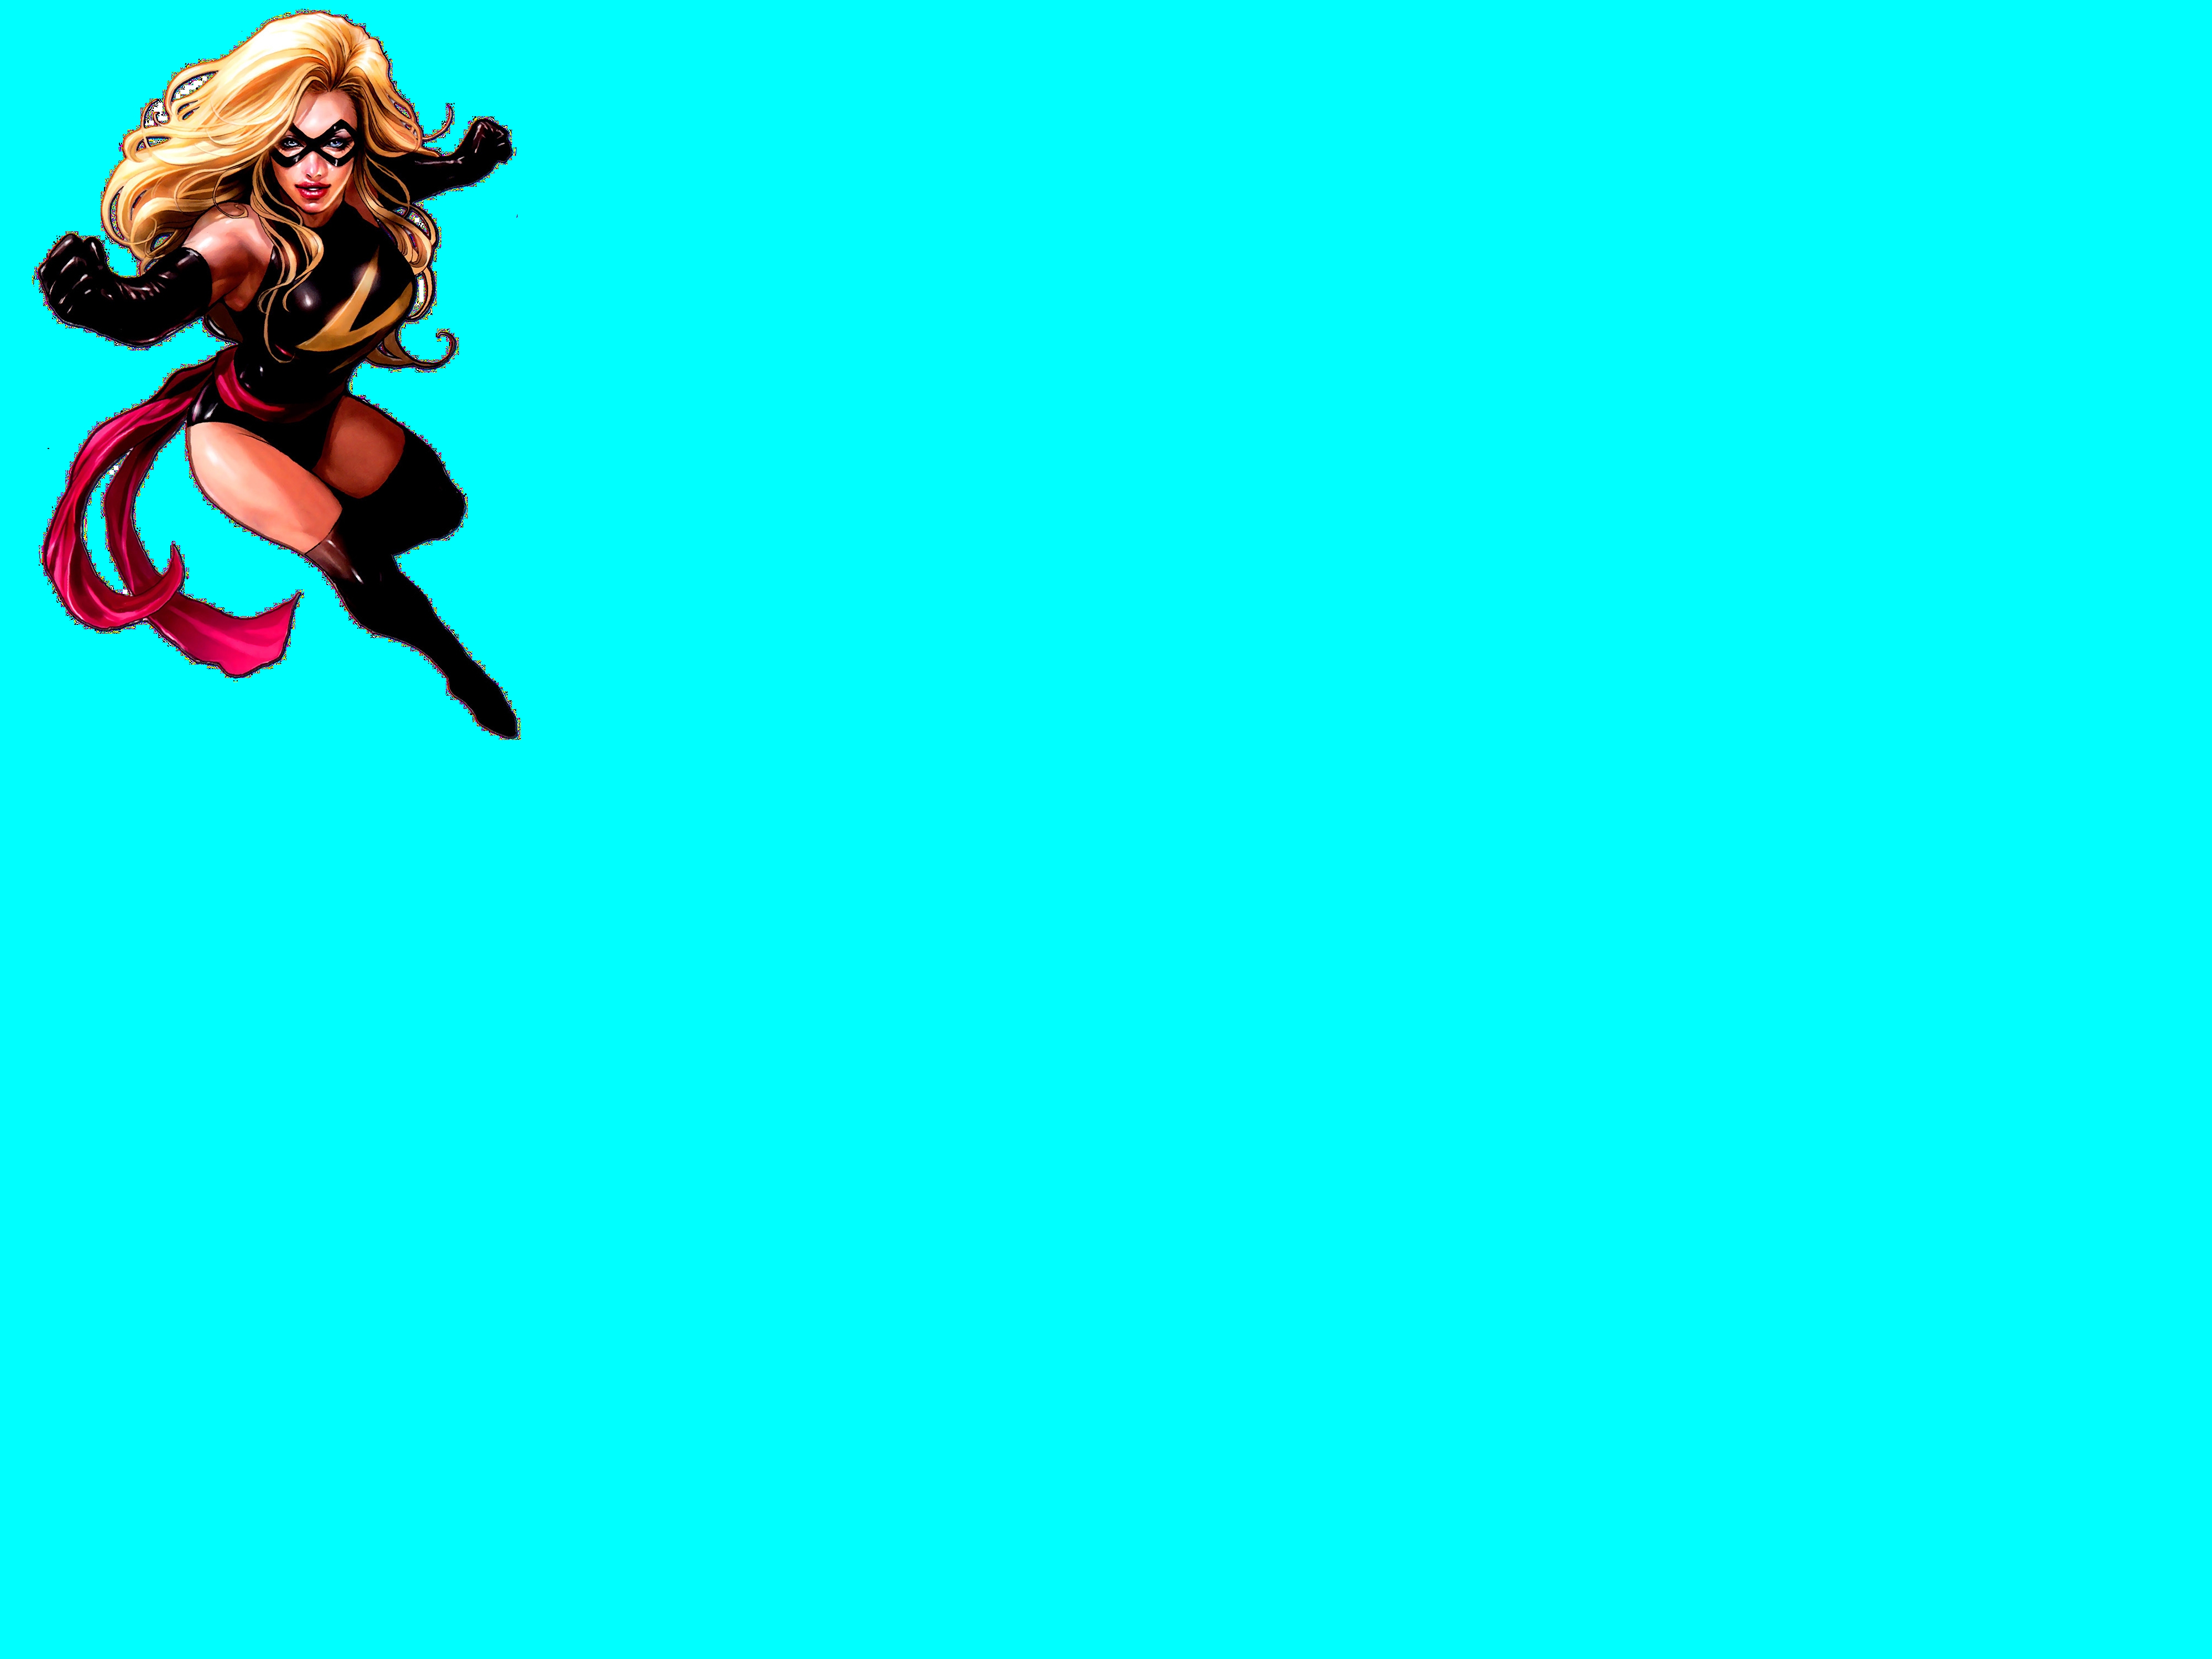 Ms. Marvel Picture